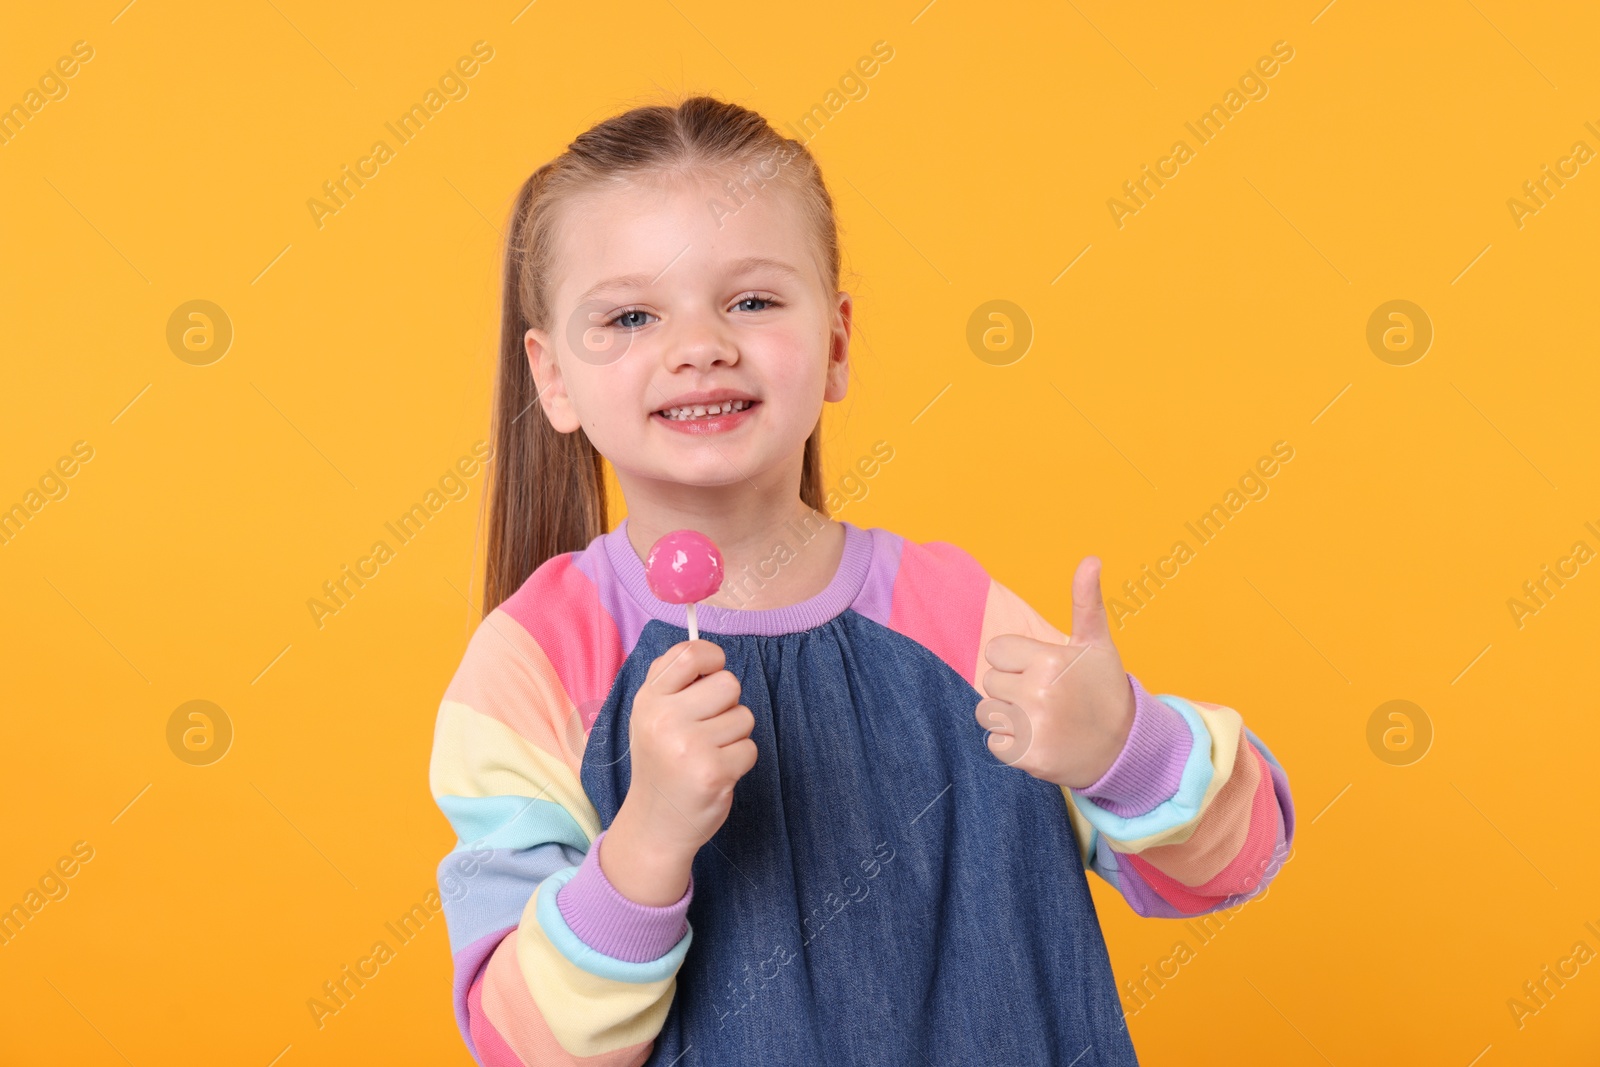 Photo of Happy little girl with lollipop showing thumbs up on orange background